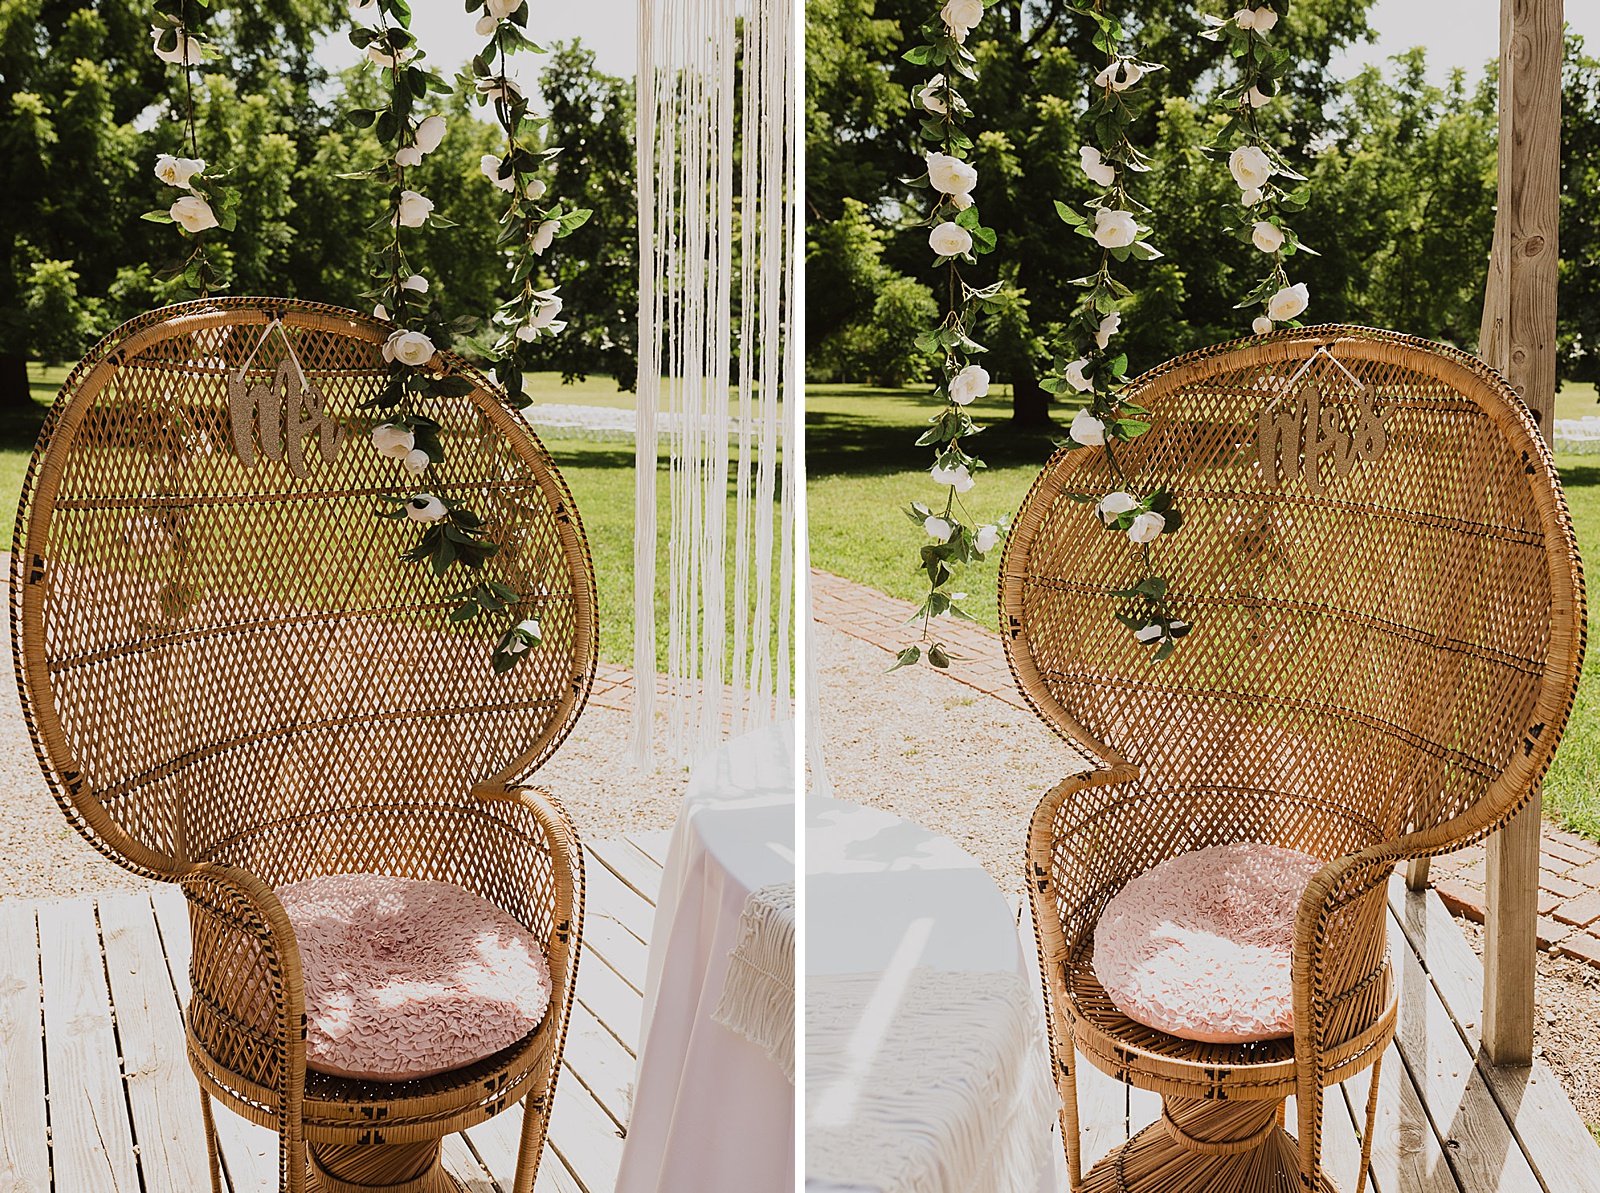 Boho Kansas City Wedding at The Wedding Place KC captured by Caitlyn Cloud Photography